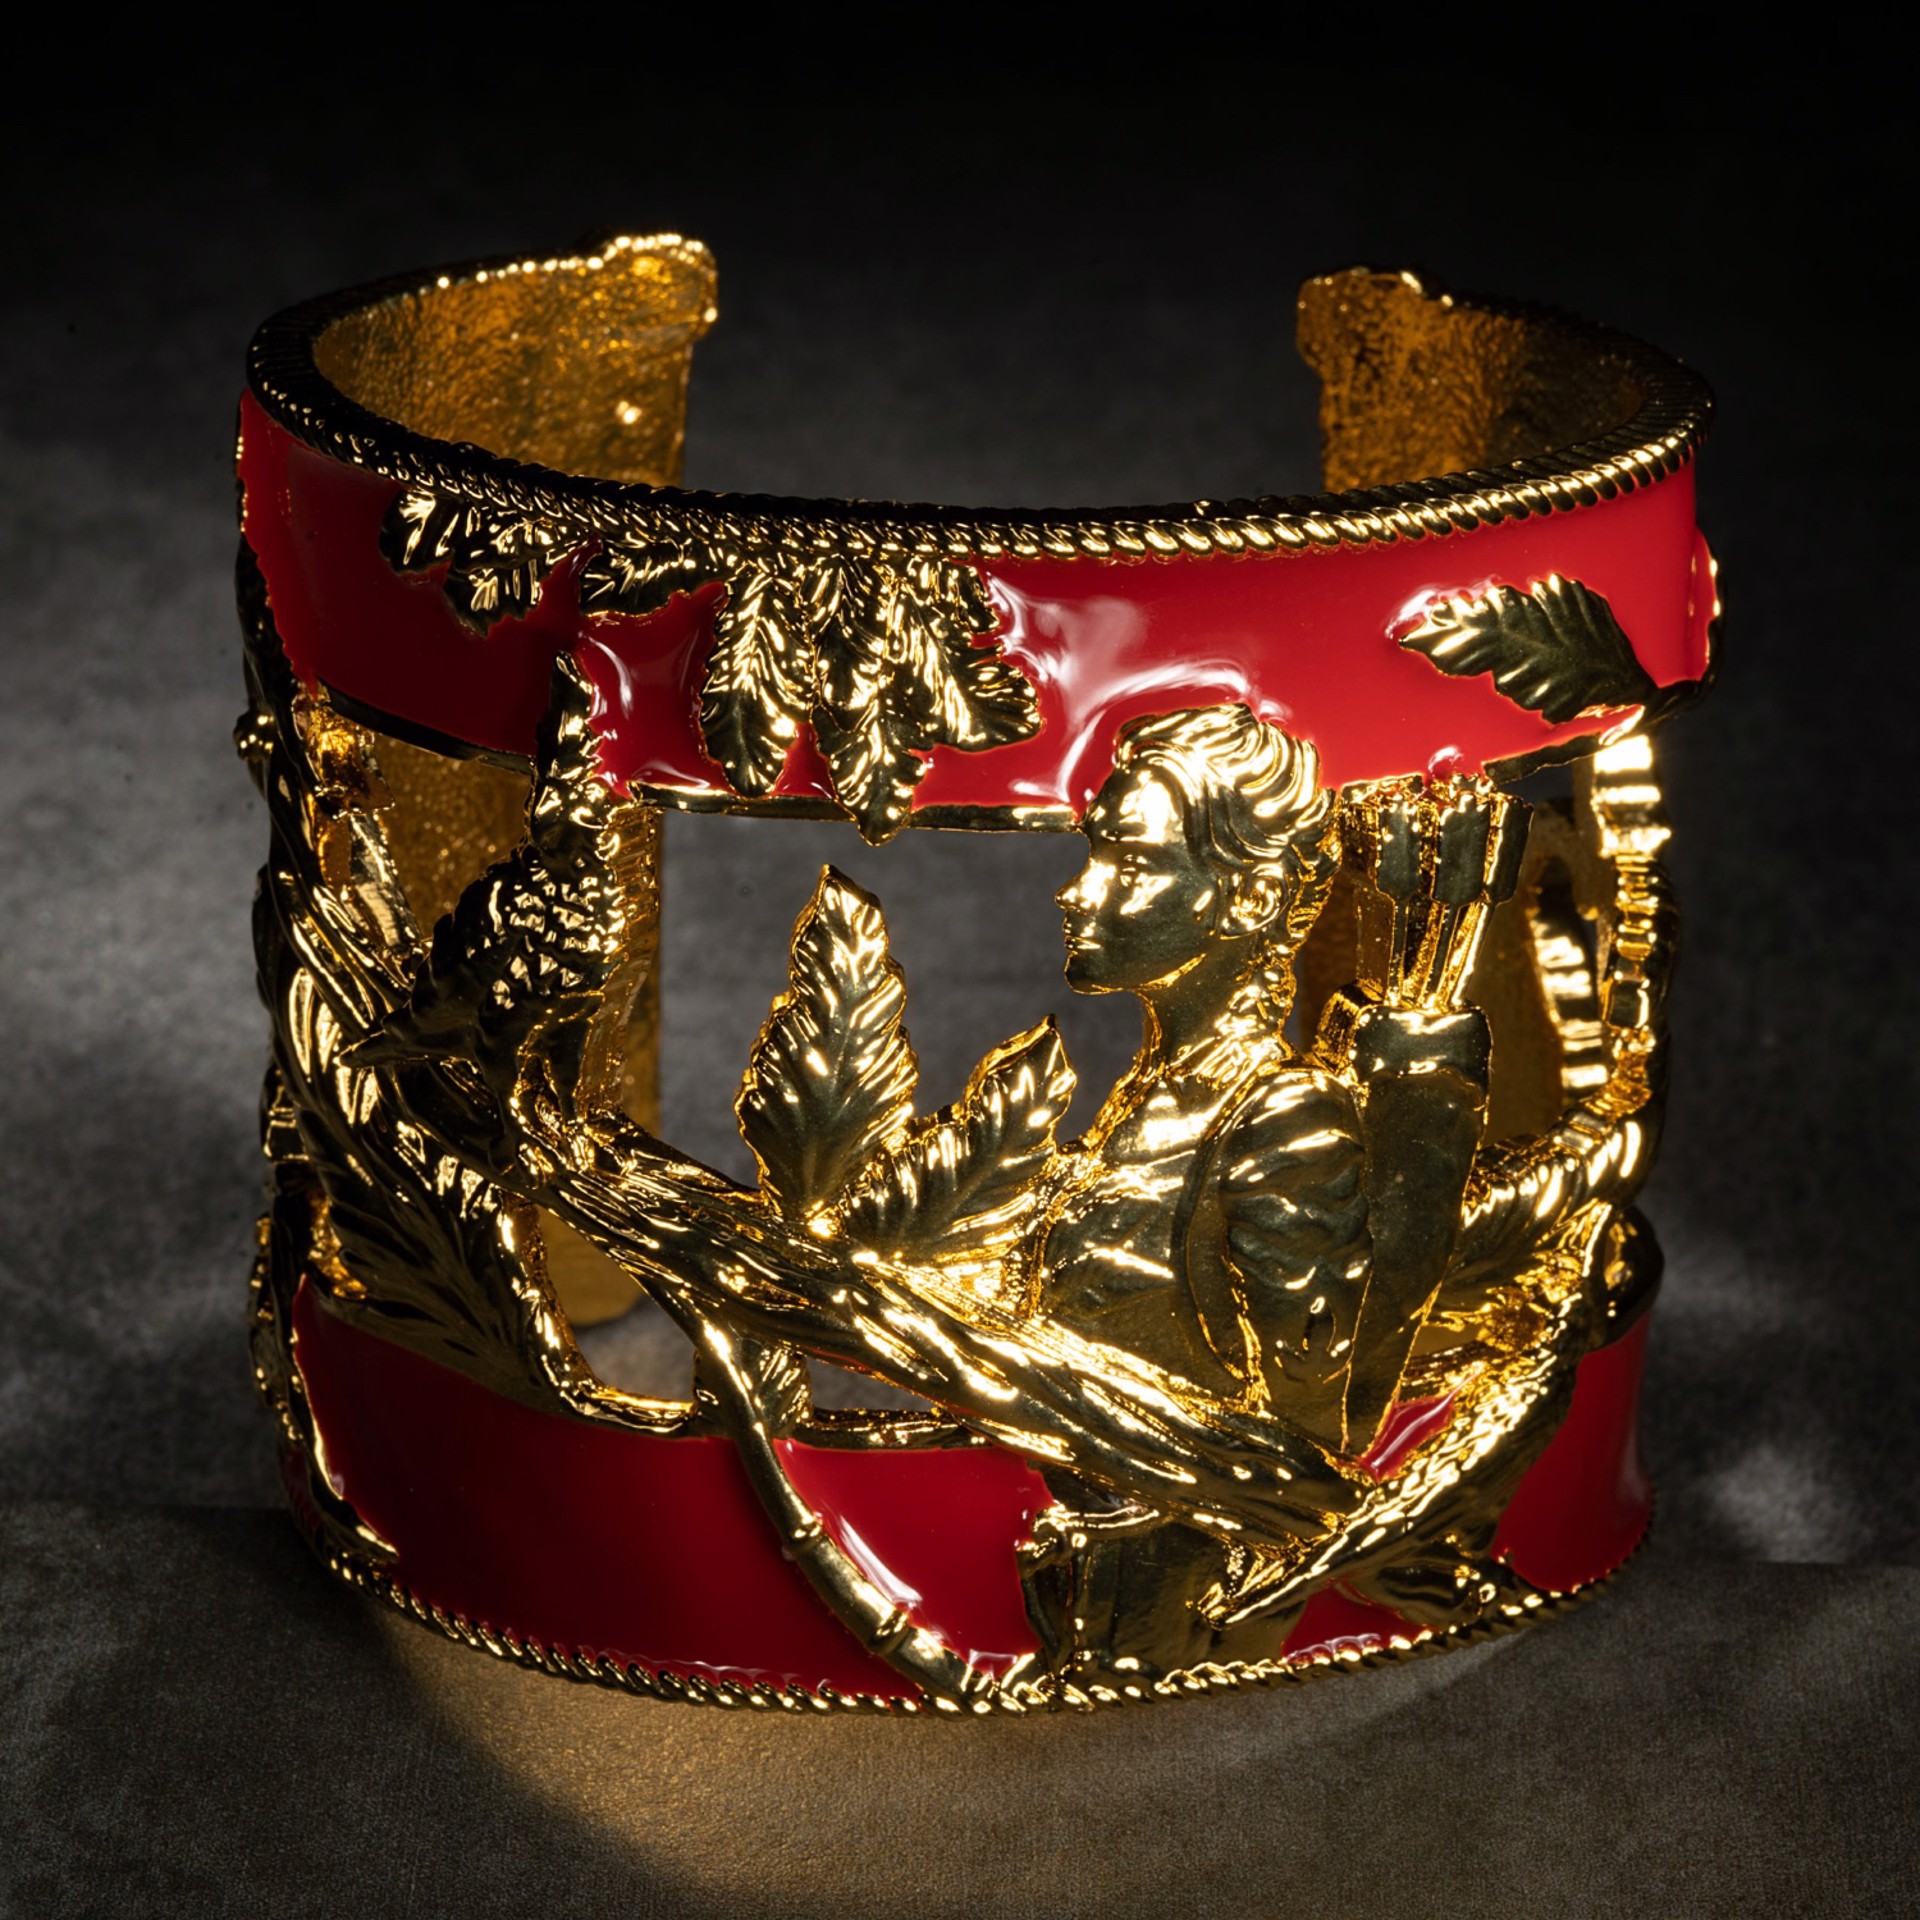 Vigor Cuff - Gold and Red Med/ Large by Angela Mia